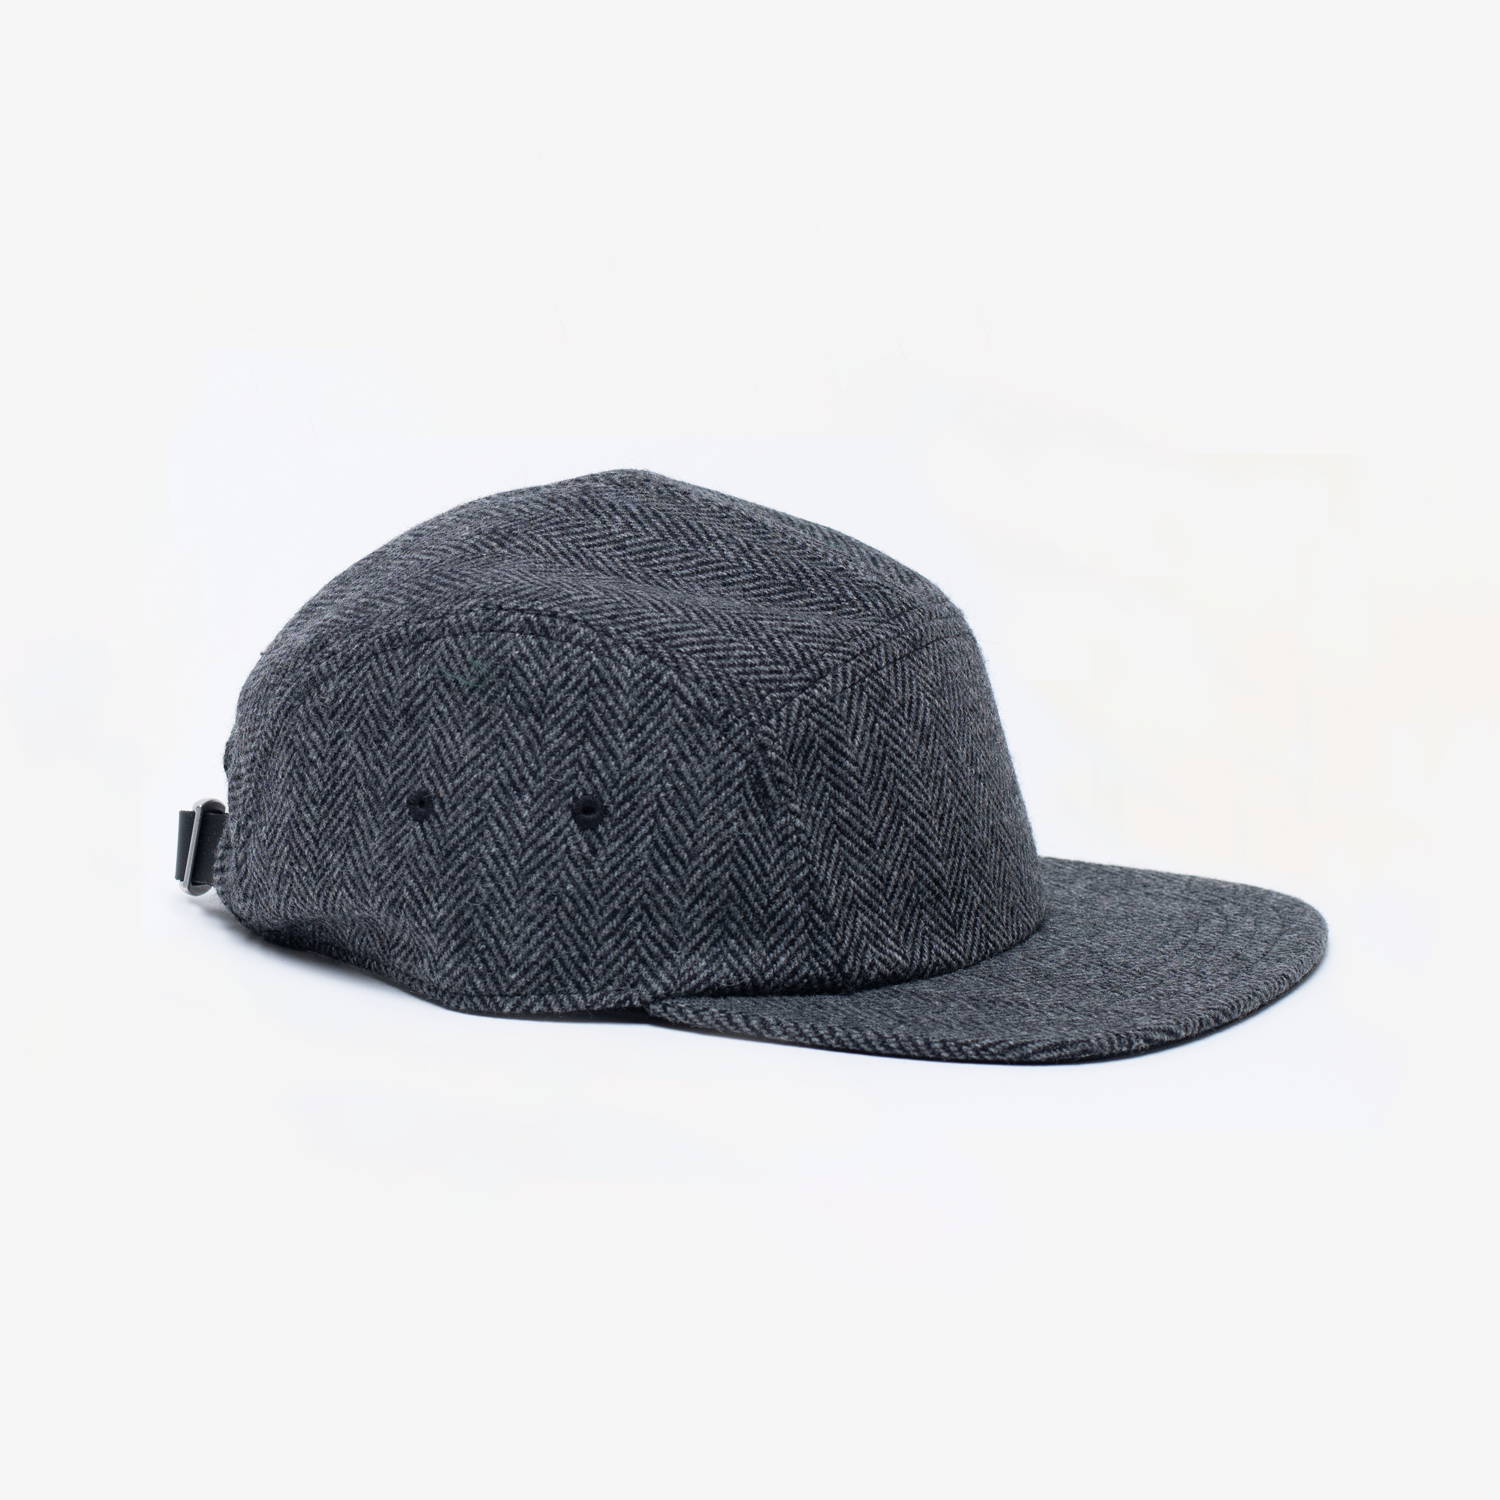 Black & Charcoal Wool – storied hats